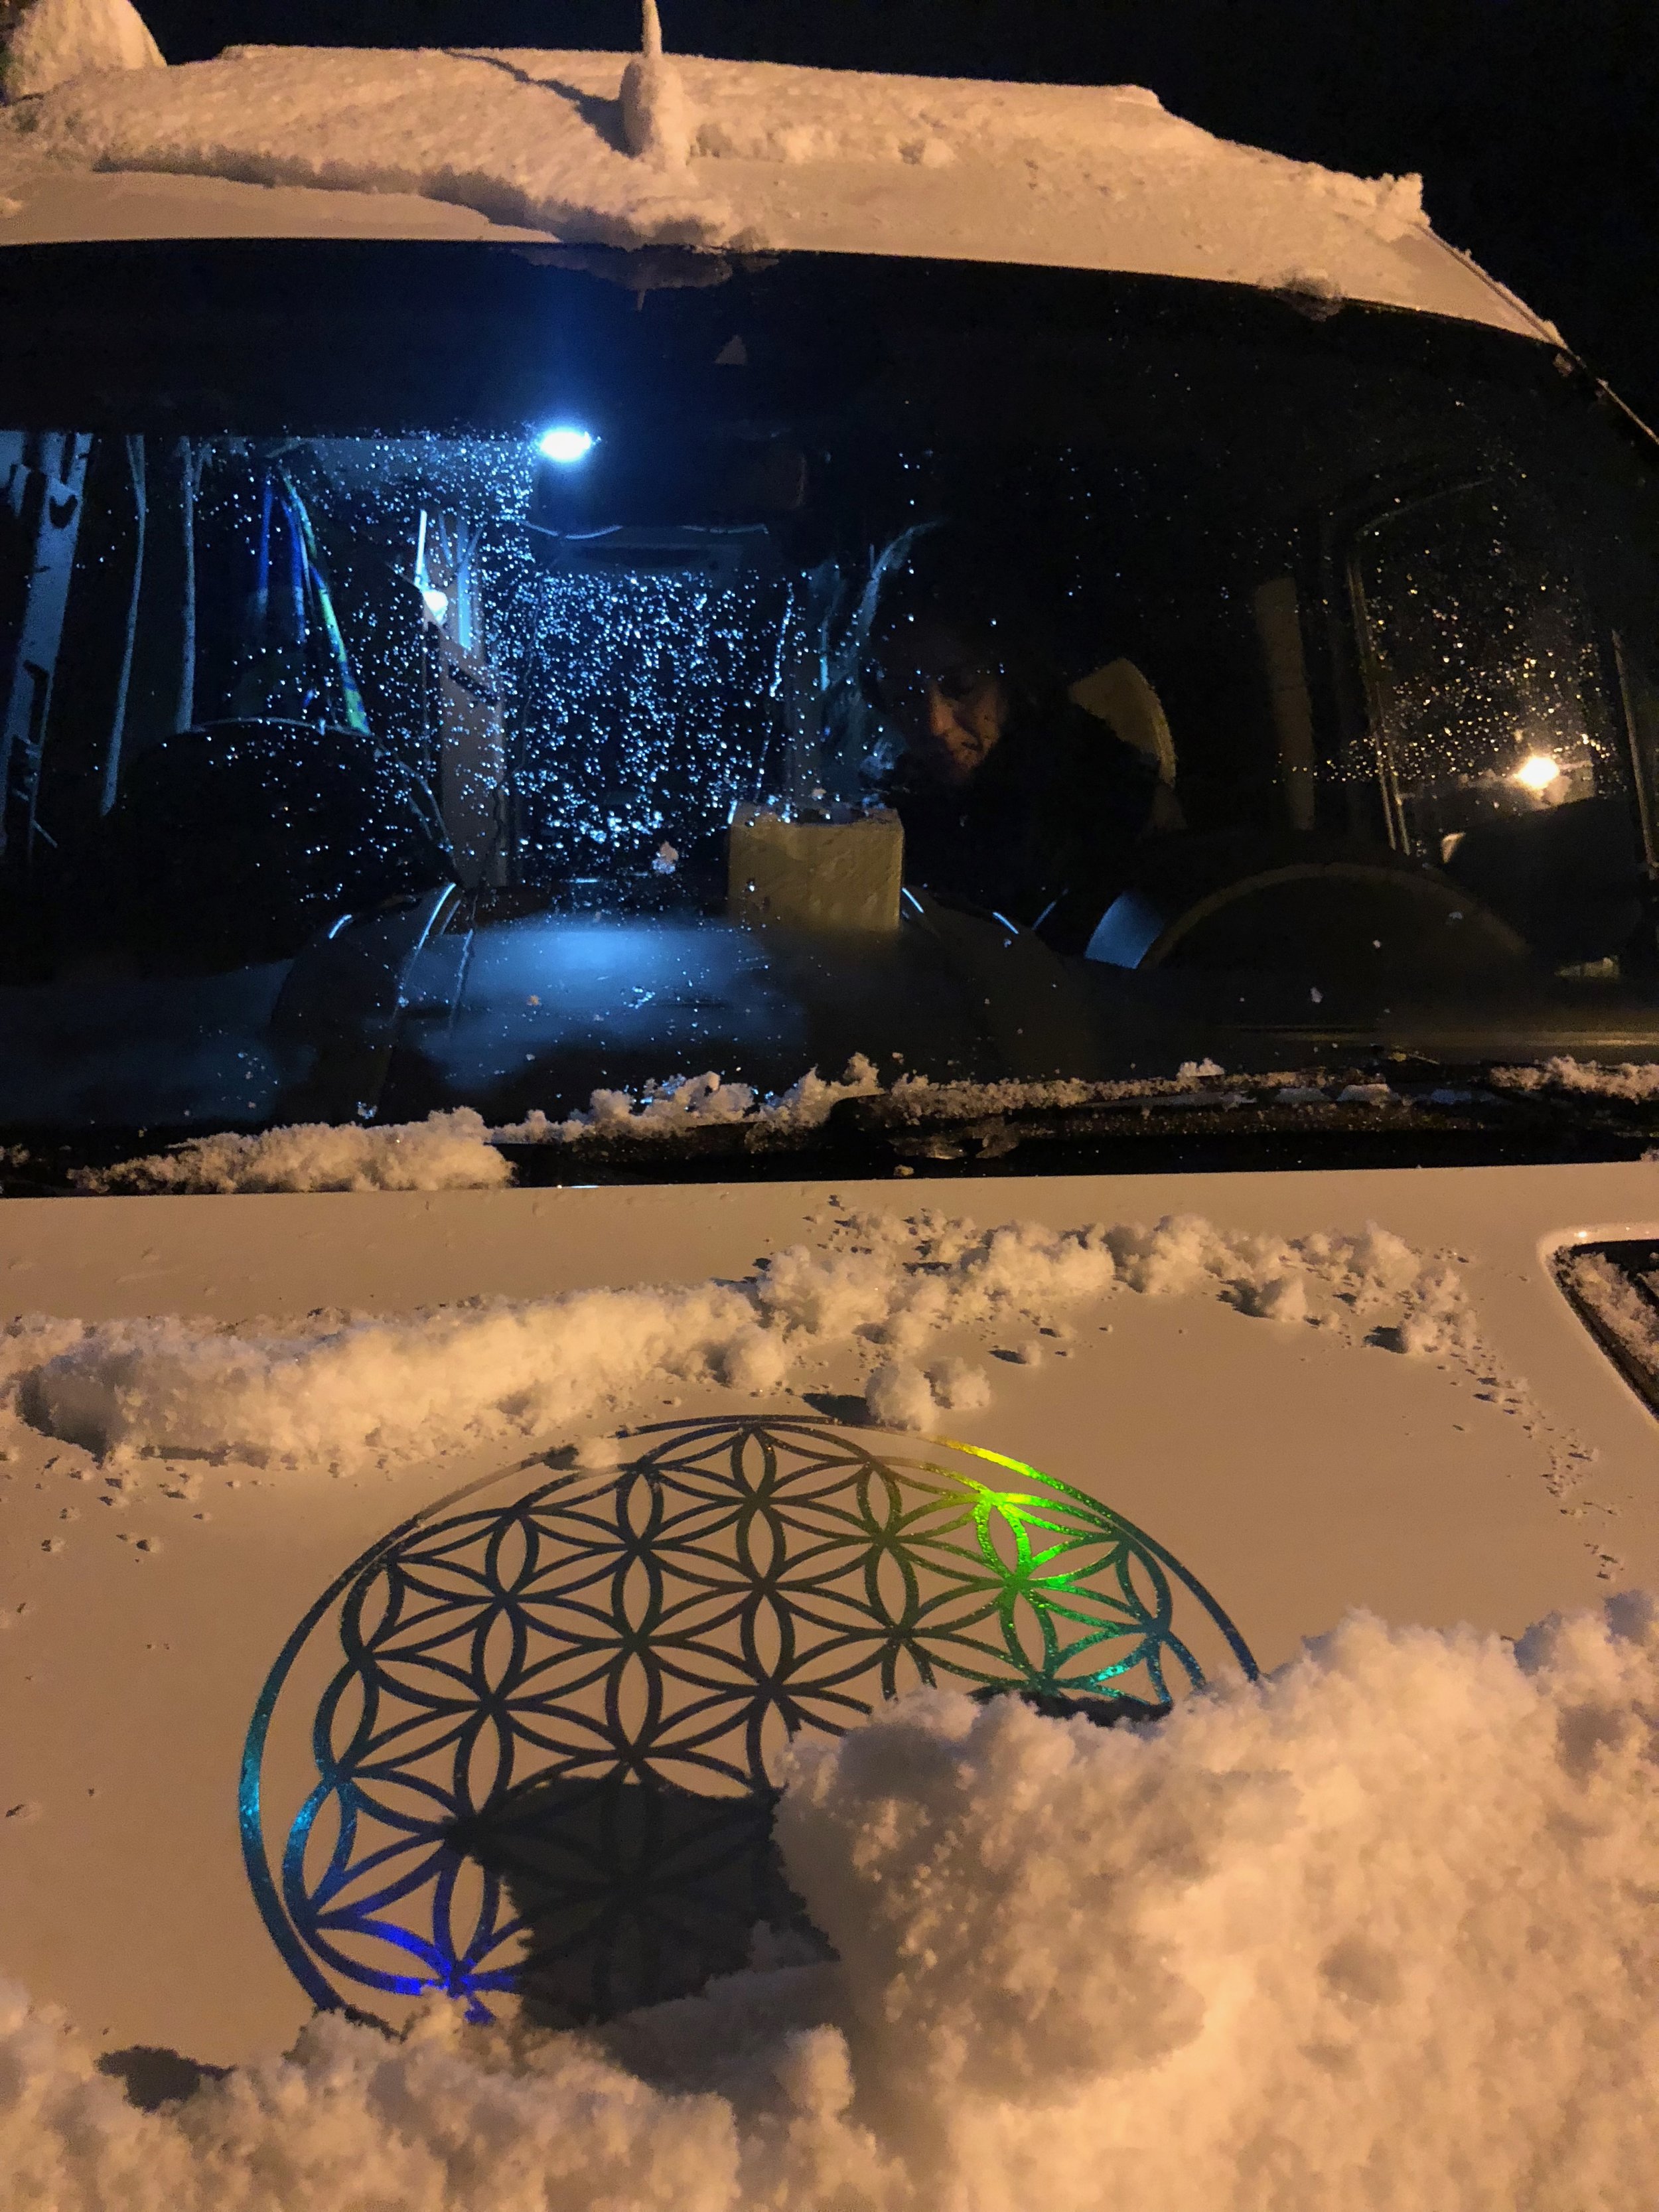 Our Sprinter Starship's first snow.